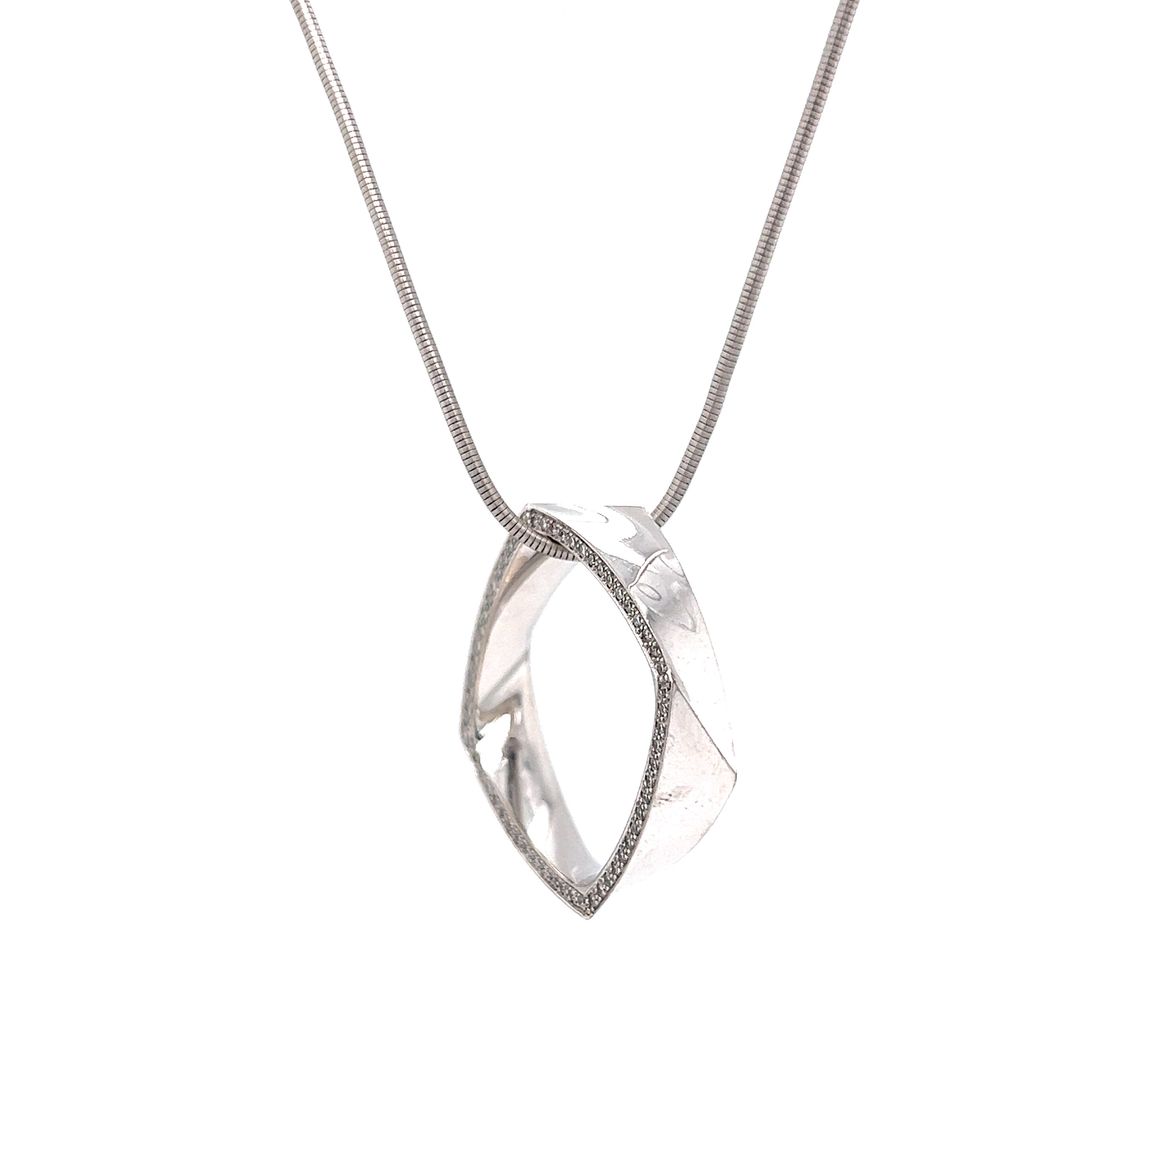 Frank Gehry Torque Tiffany & Co. Necklace in 18K White Gold